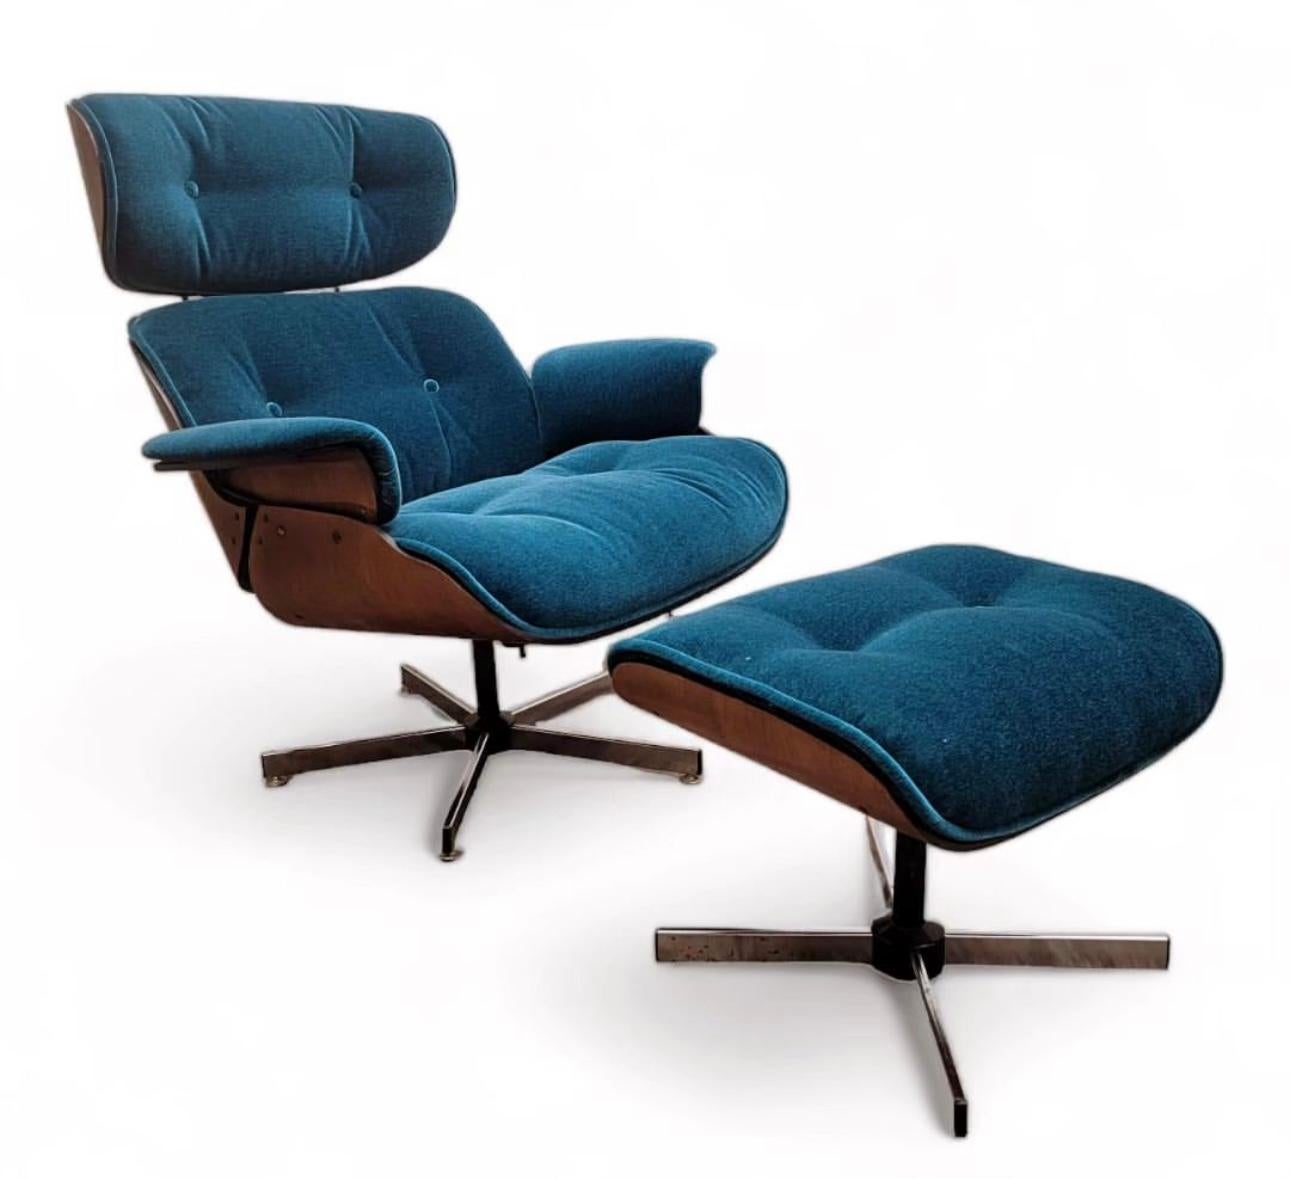 Mid Century Modern Eames Style Bentwood Lounge & Ottoman by Plycraft Upholstered in Teal Blue Italian Mohair - 2 Piece Set 

This iconic Mid Century modern Eames-inspired bentwood lounge and ottoman exudes timeless elegance and comfort. Newly custom